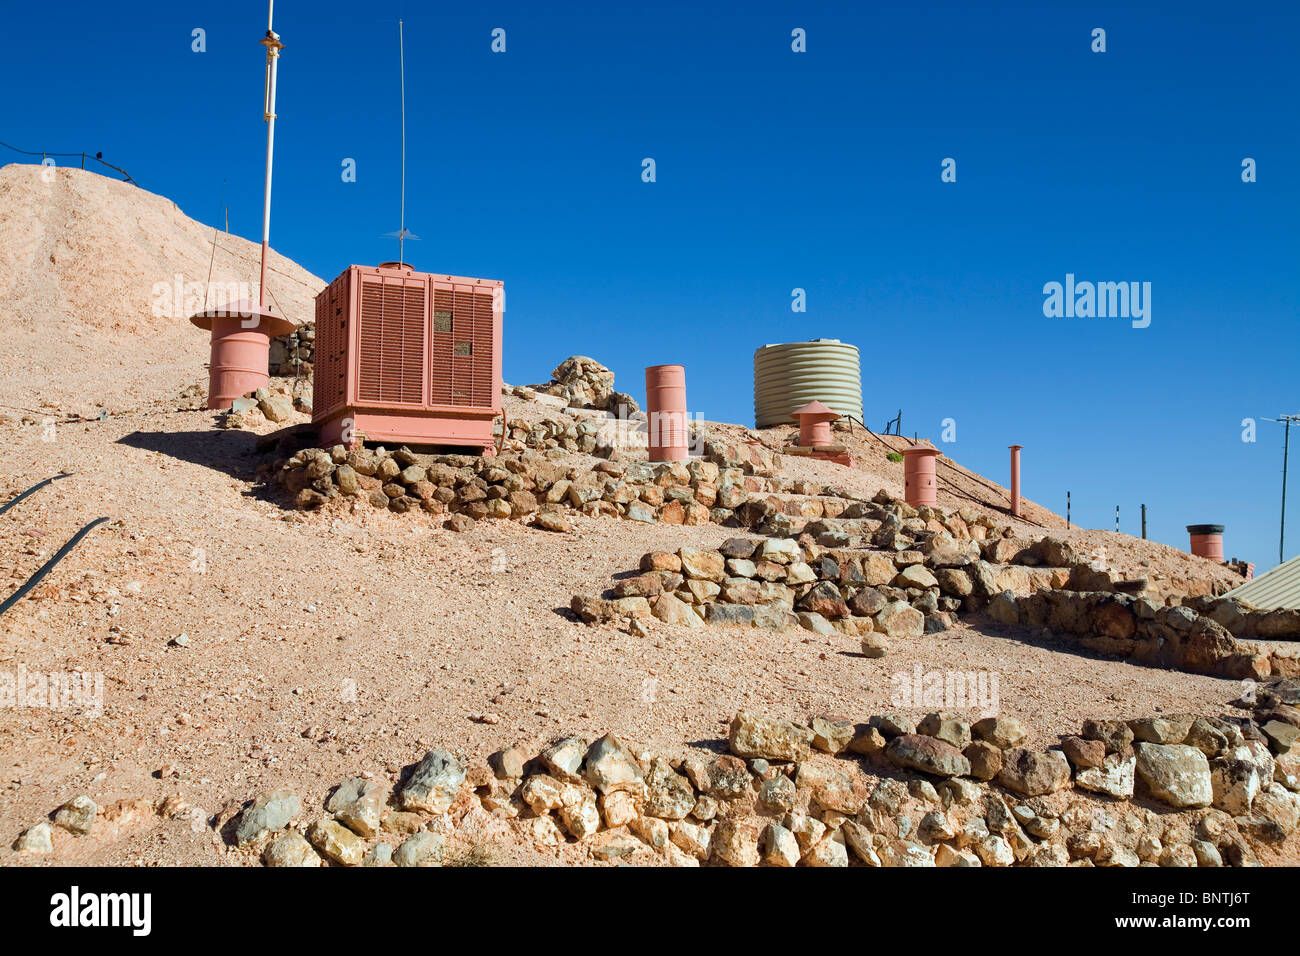 Airvents on the surface provide ventilation for underground buildings known as dugouts. Coober Pedy, South Australia, AUSTRALIA. Stock Photo